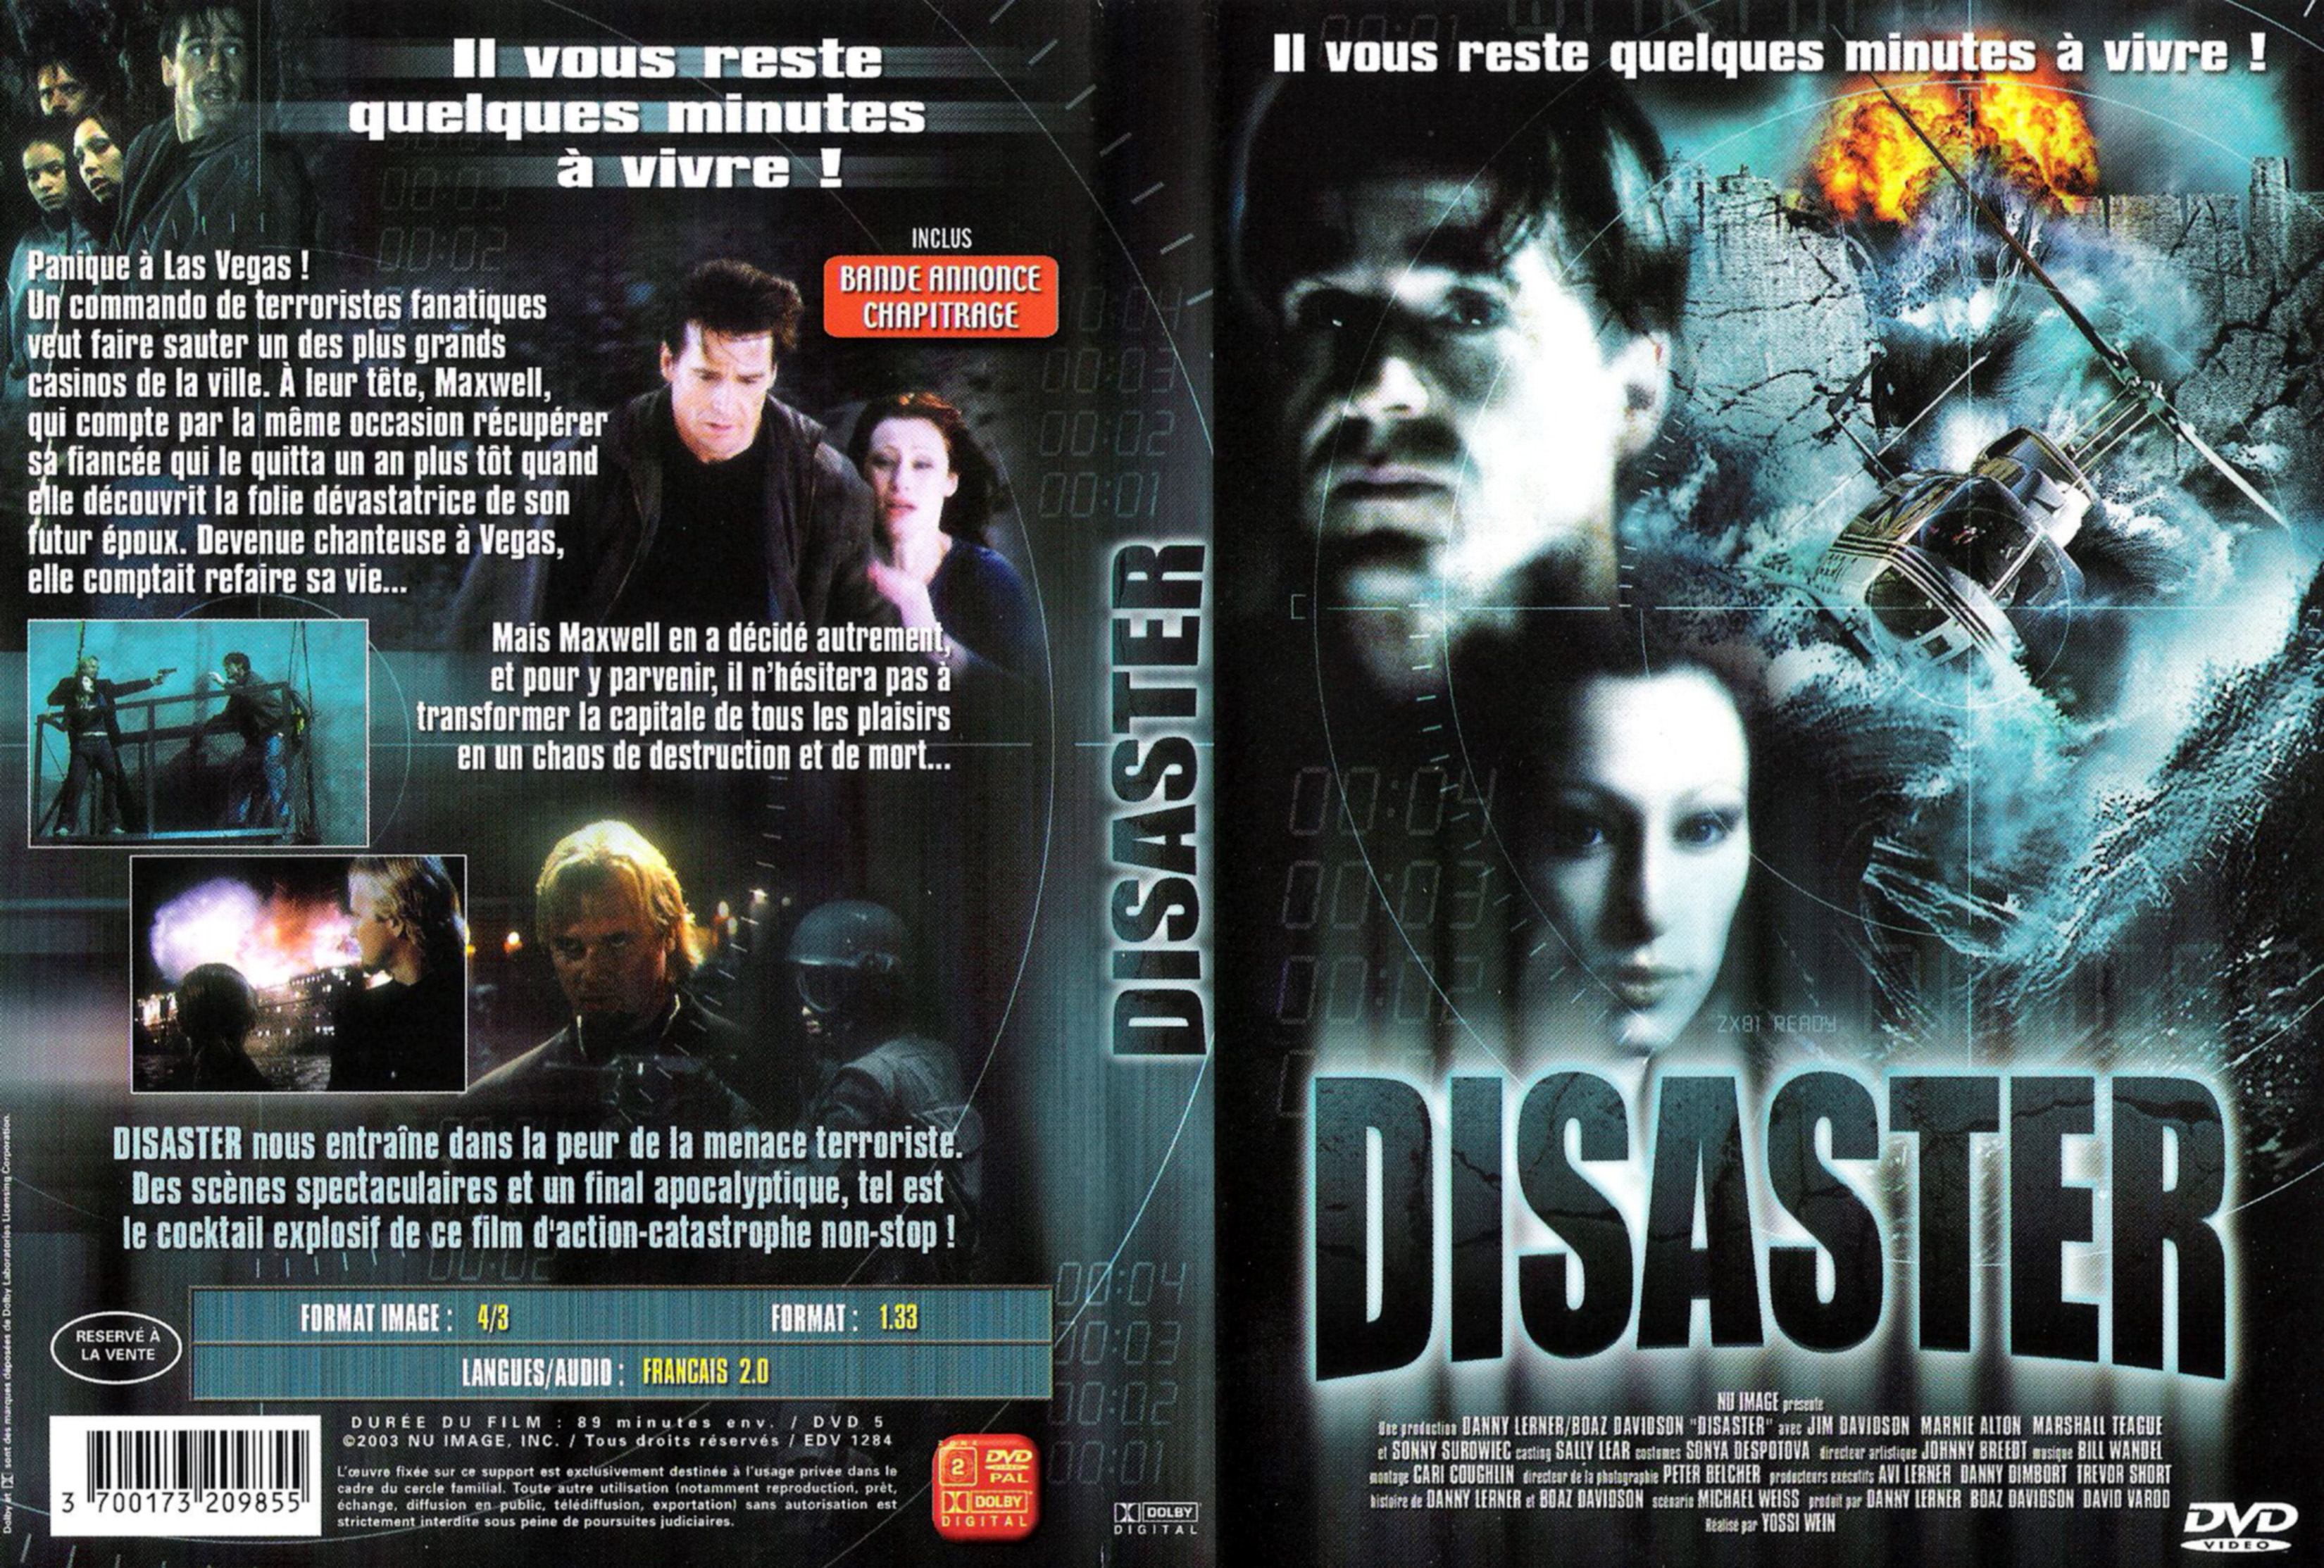 Jaquette DVD Disaster (2003)